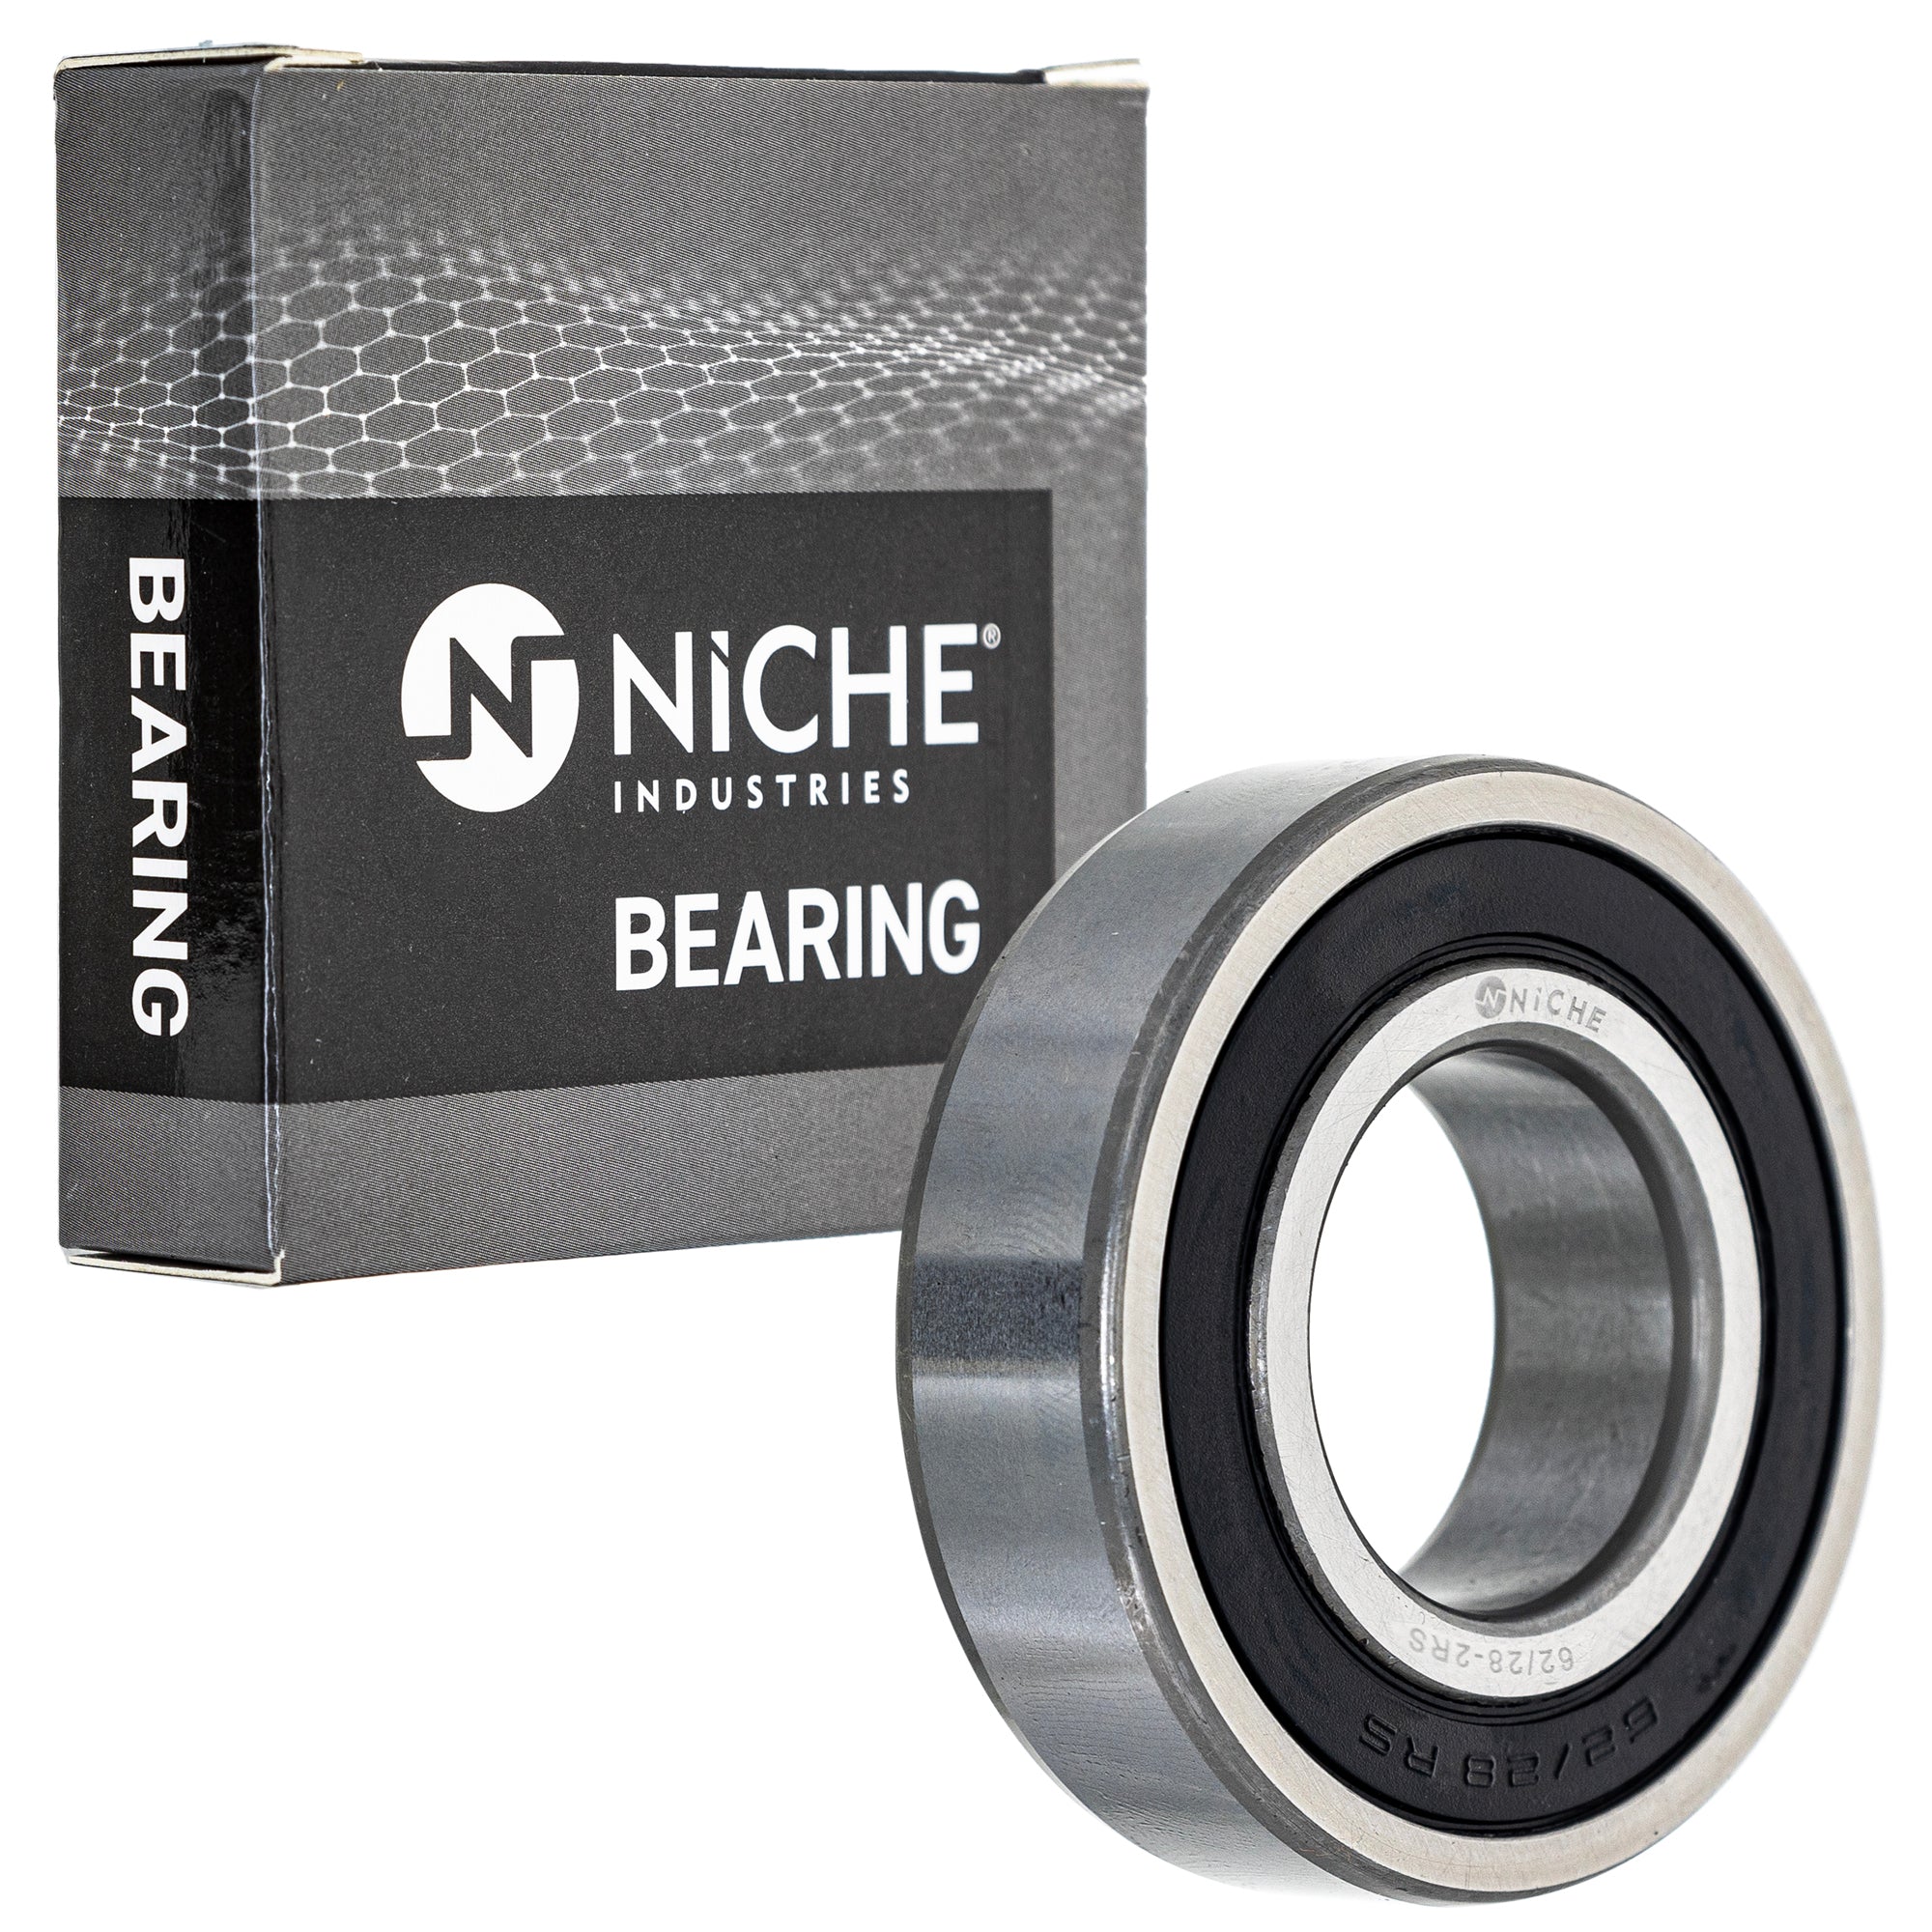 NICHE 519-CBB2235R Bearing & Seal Kit 10-Pack for zOTHER Rancher